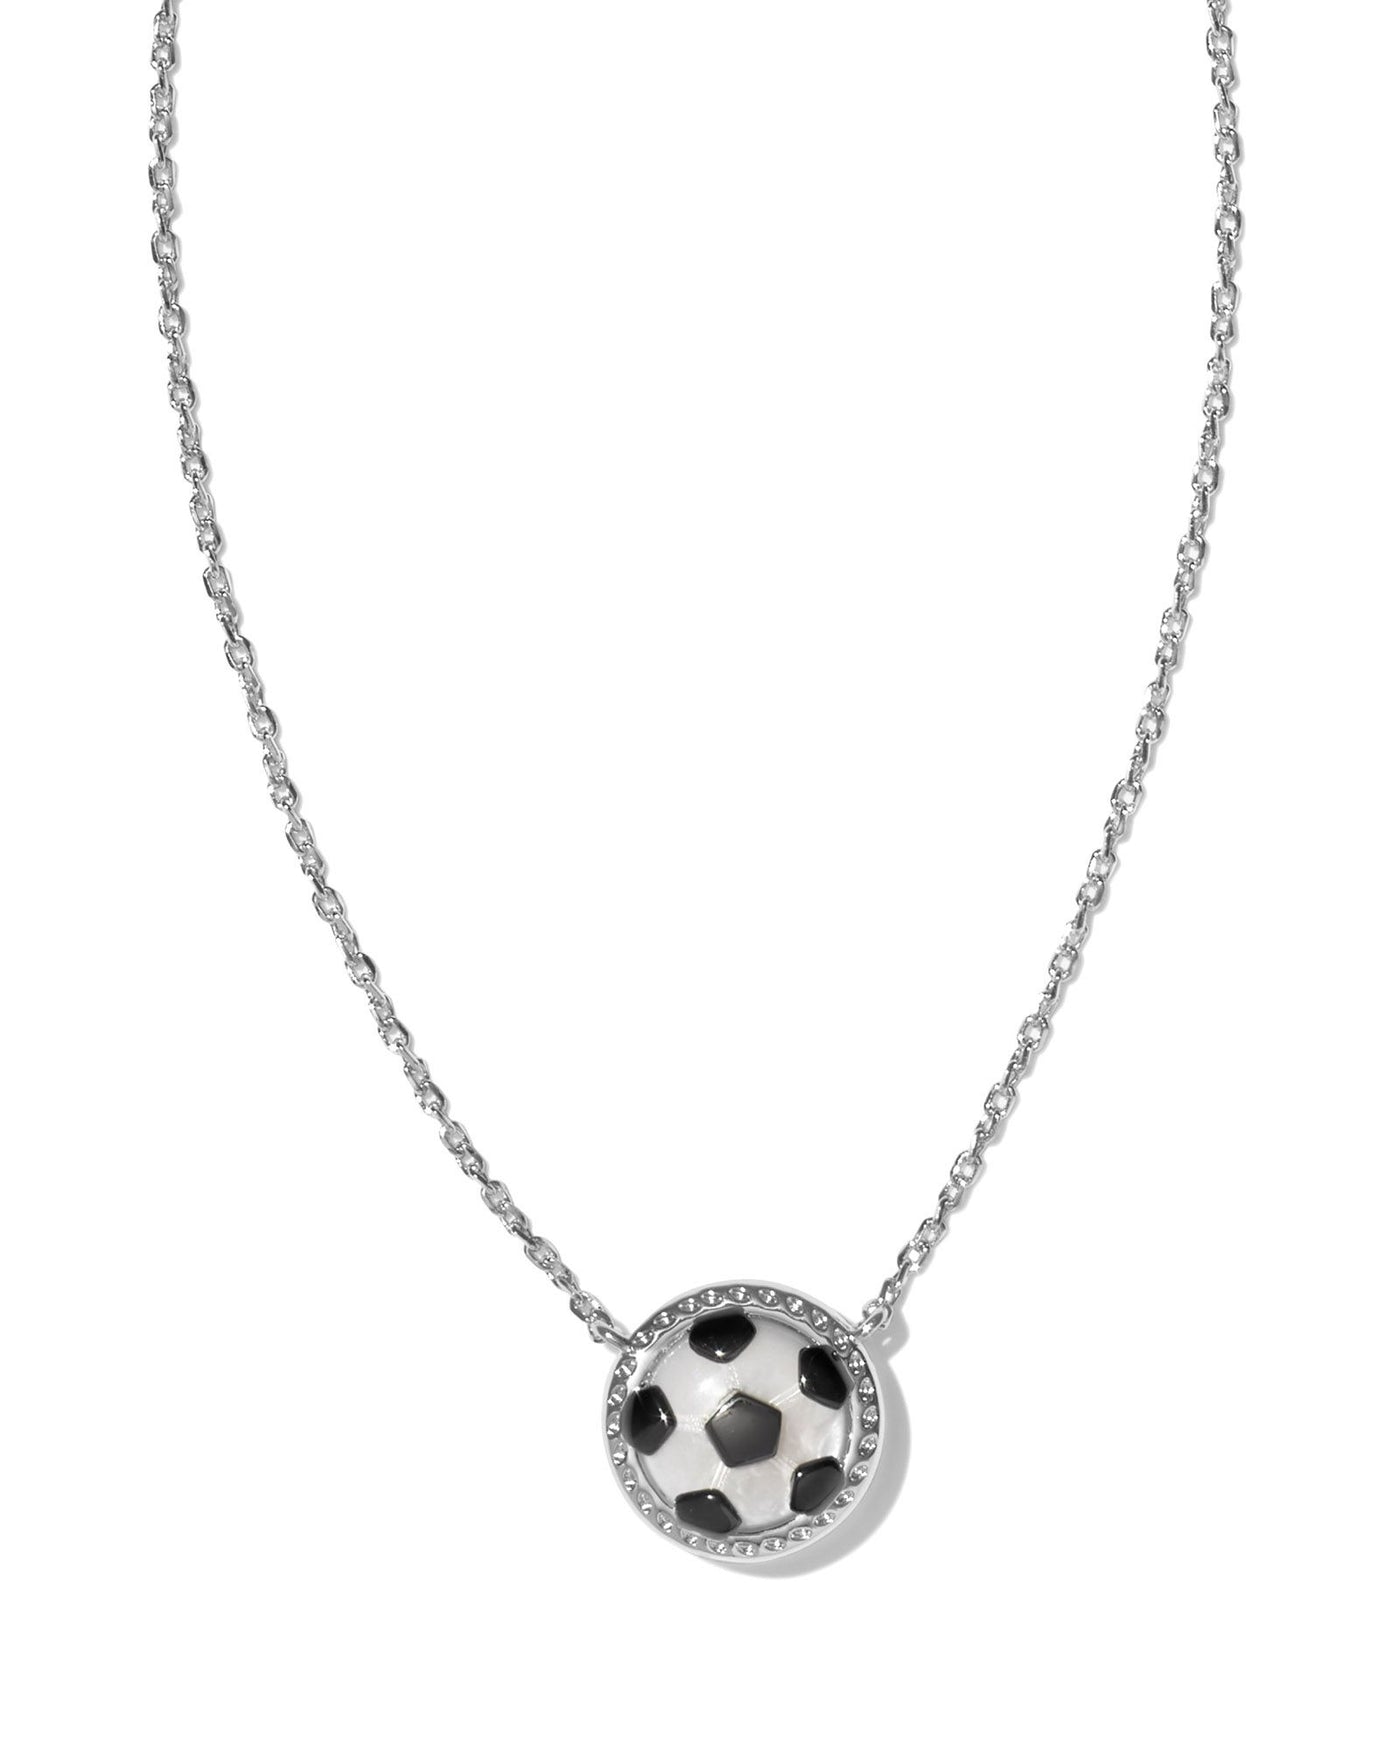 Kendra Scott Soccer Pendant Necklace in Silver on white background close up.